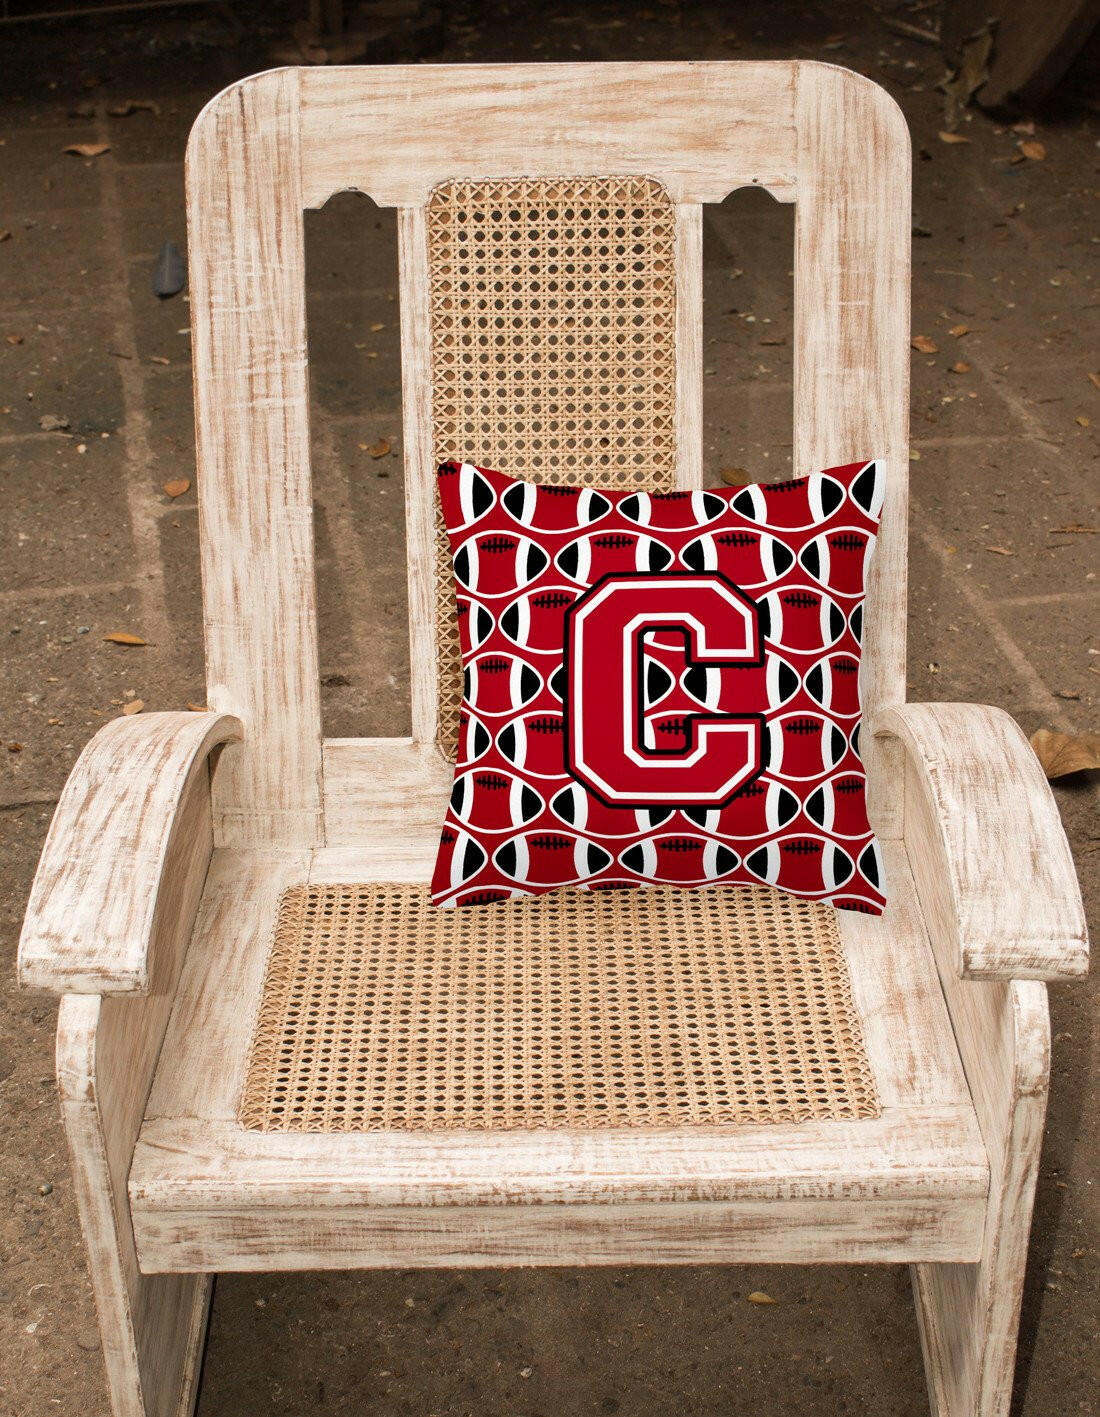 Letter C Football Red, Black and White Fabric Decorative Pillow CJ1073-CPW1414 by Caroline's Treasures